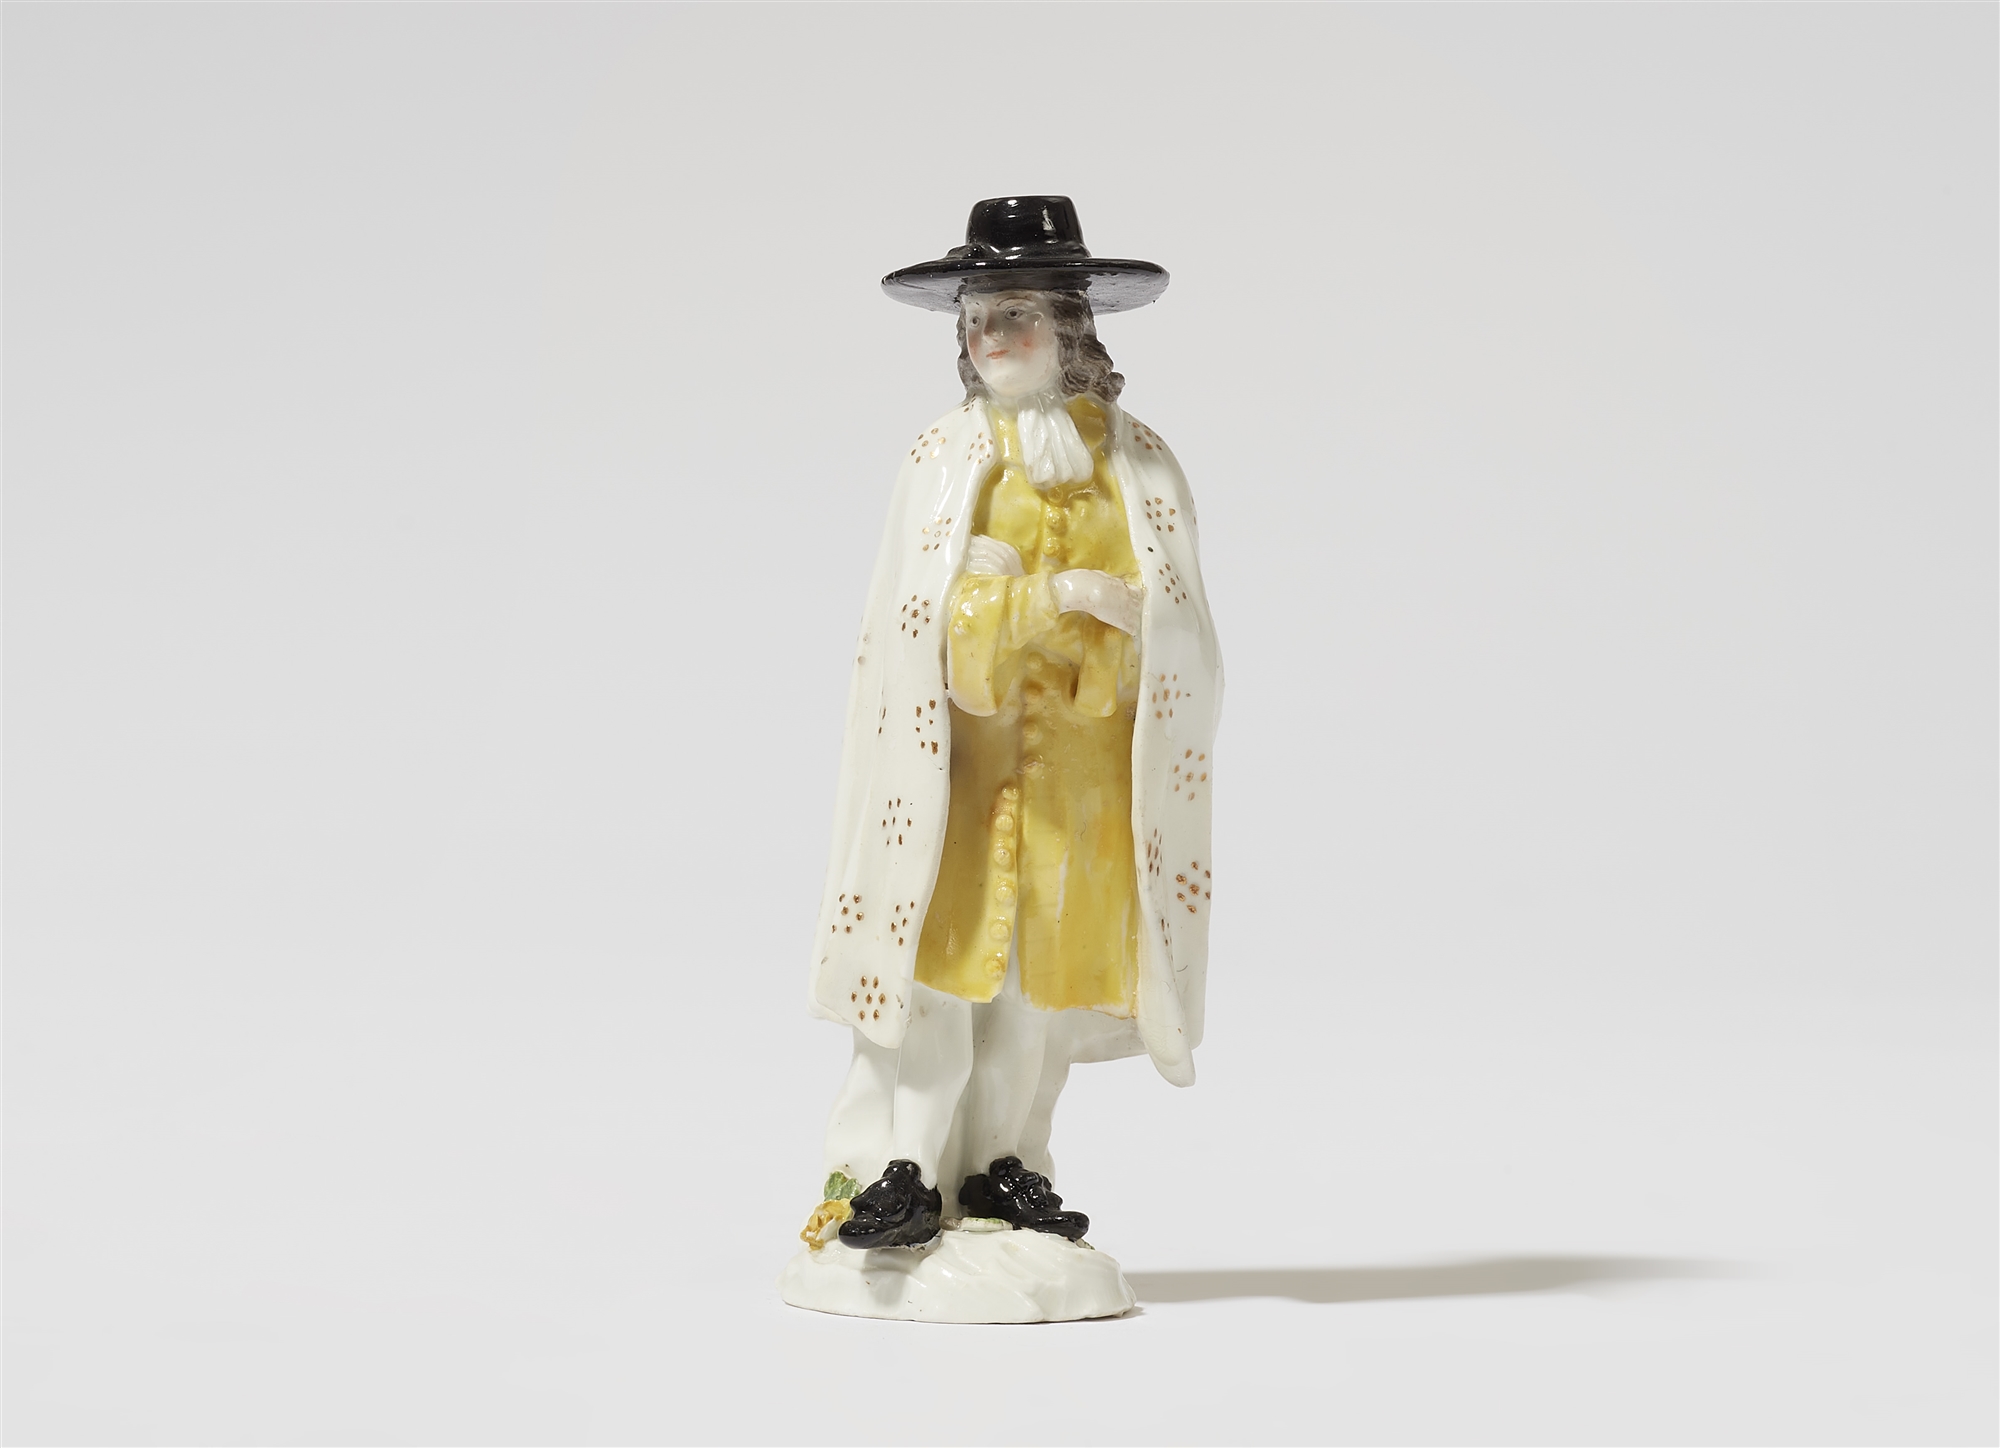 A Meissen porcelain figure of John the Quaker from the Cries of London series